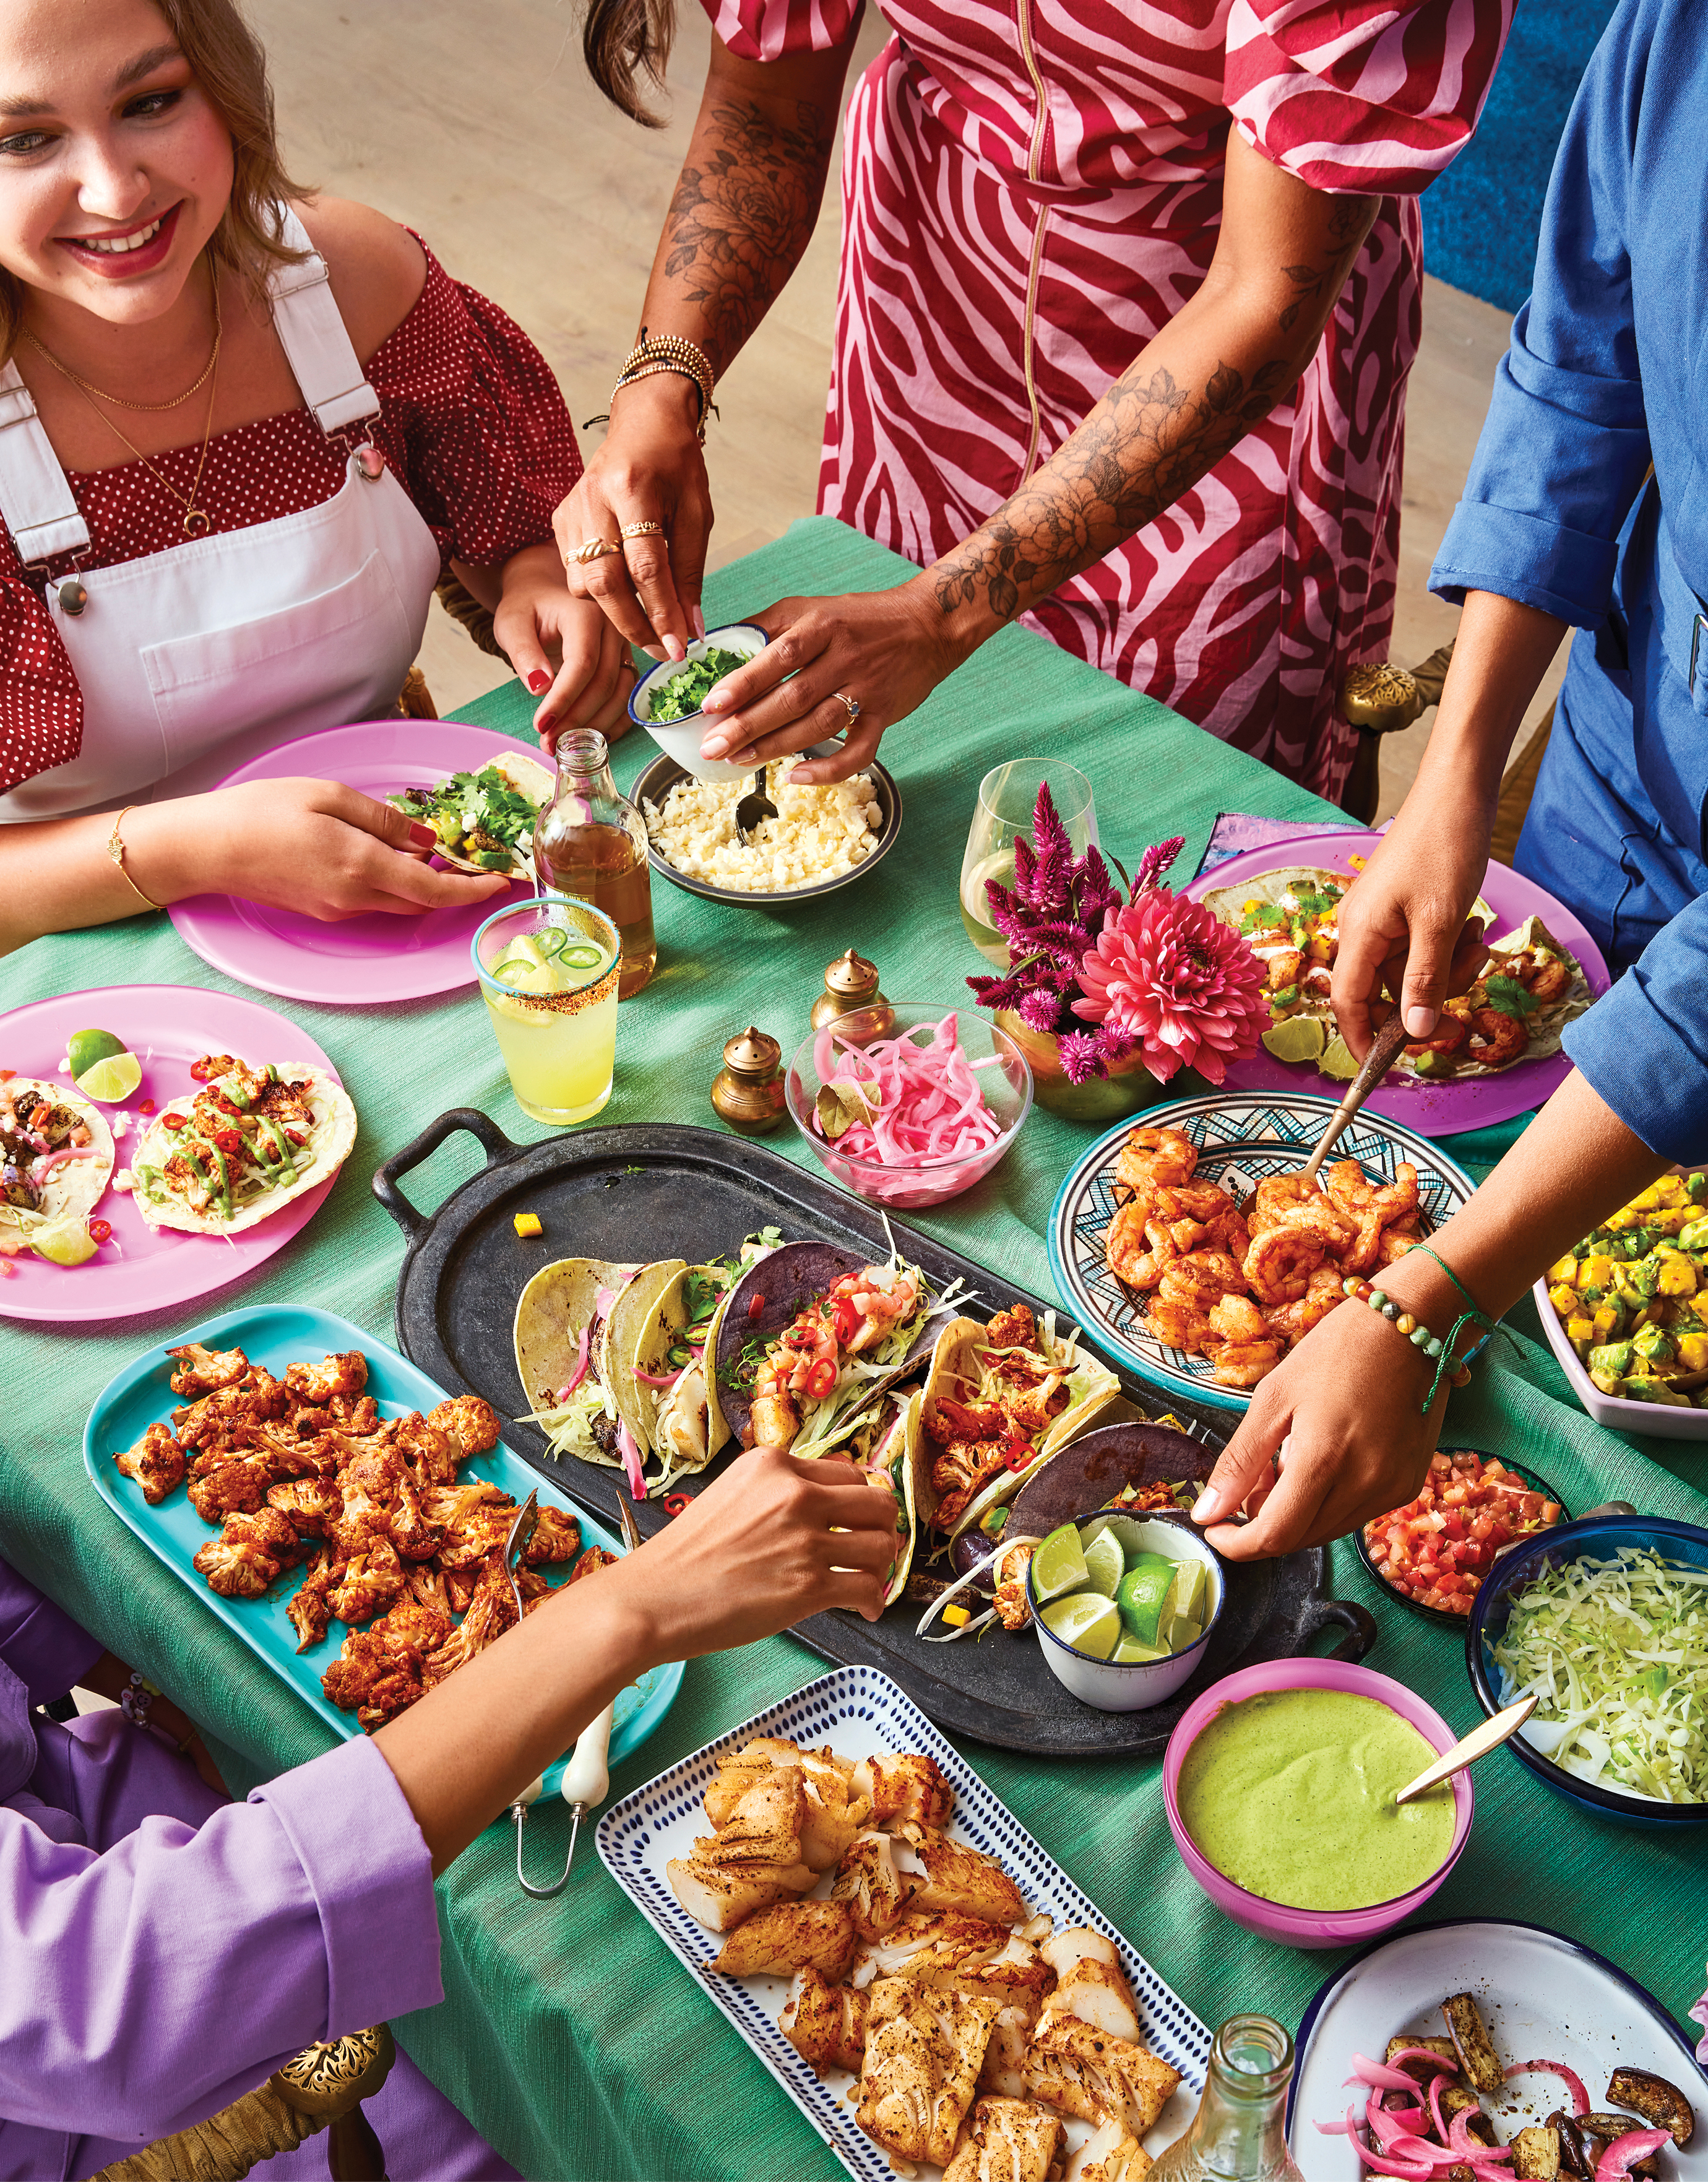 A cropped image of a table with a teal tablecloth laid out with a variety of taco dishes and fillings, and cropped to show parts of the diners sitting or standing around the table, with hands reaching in to serve